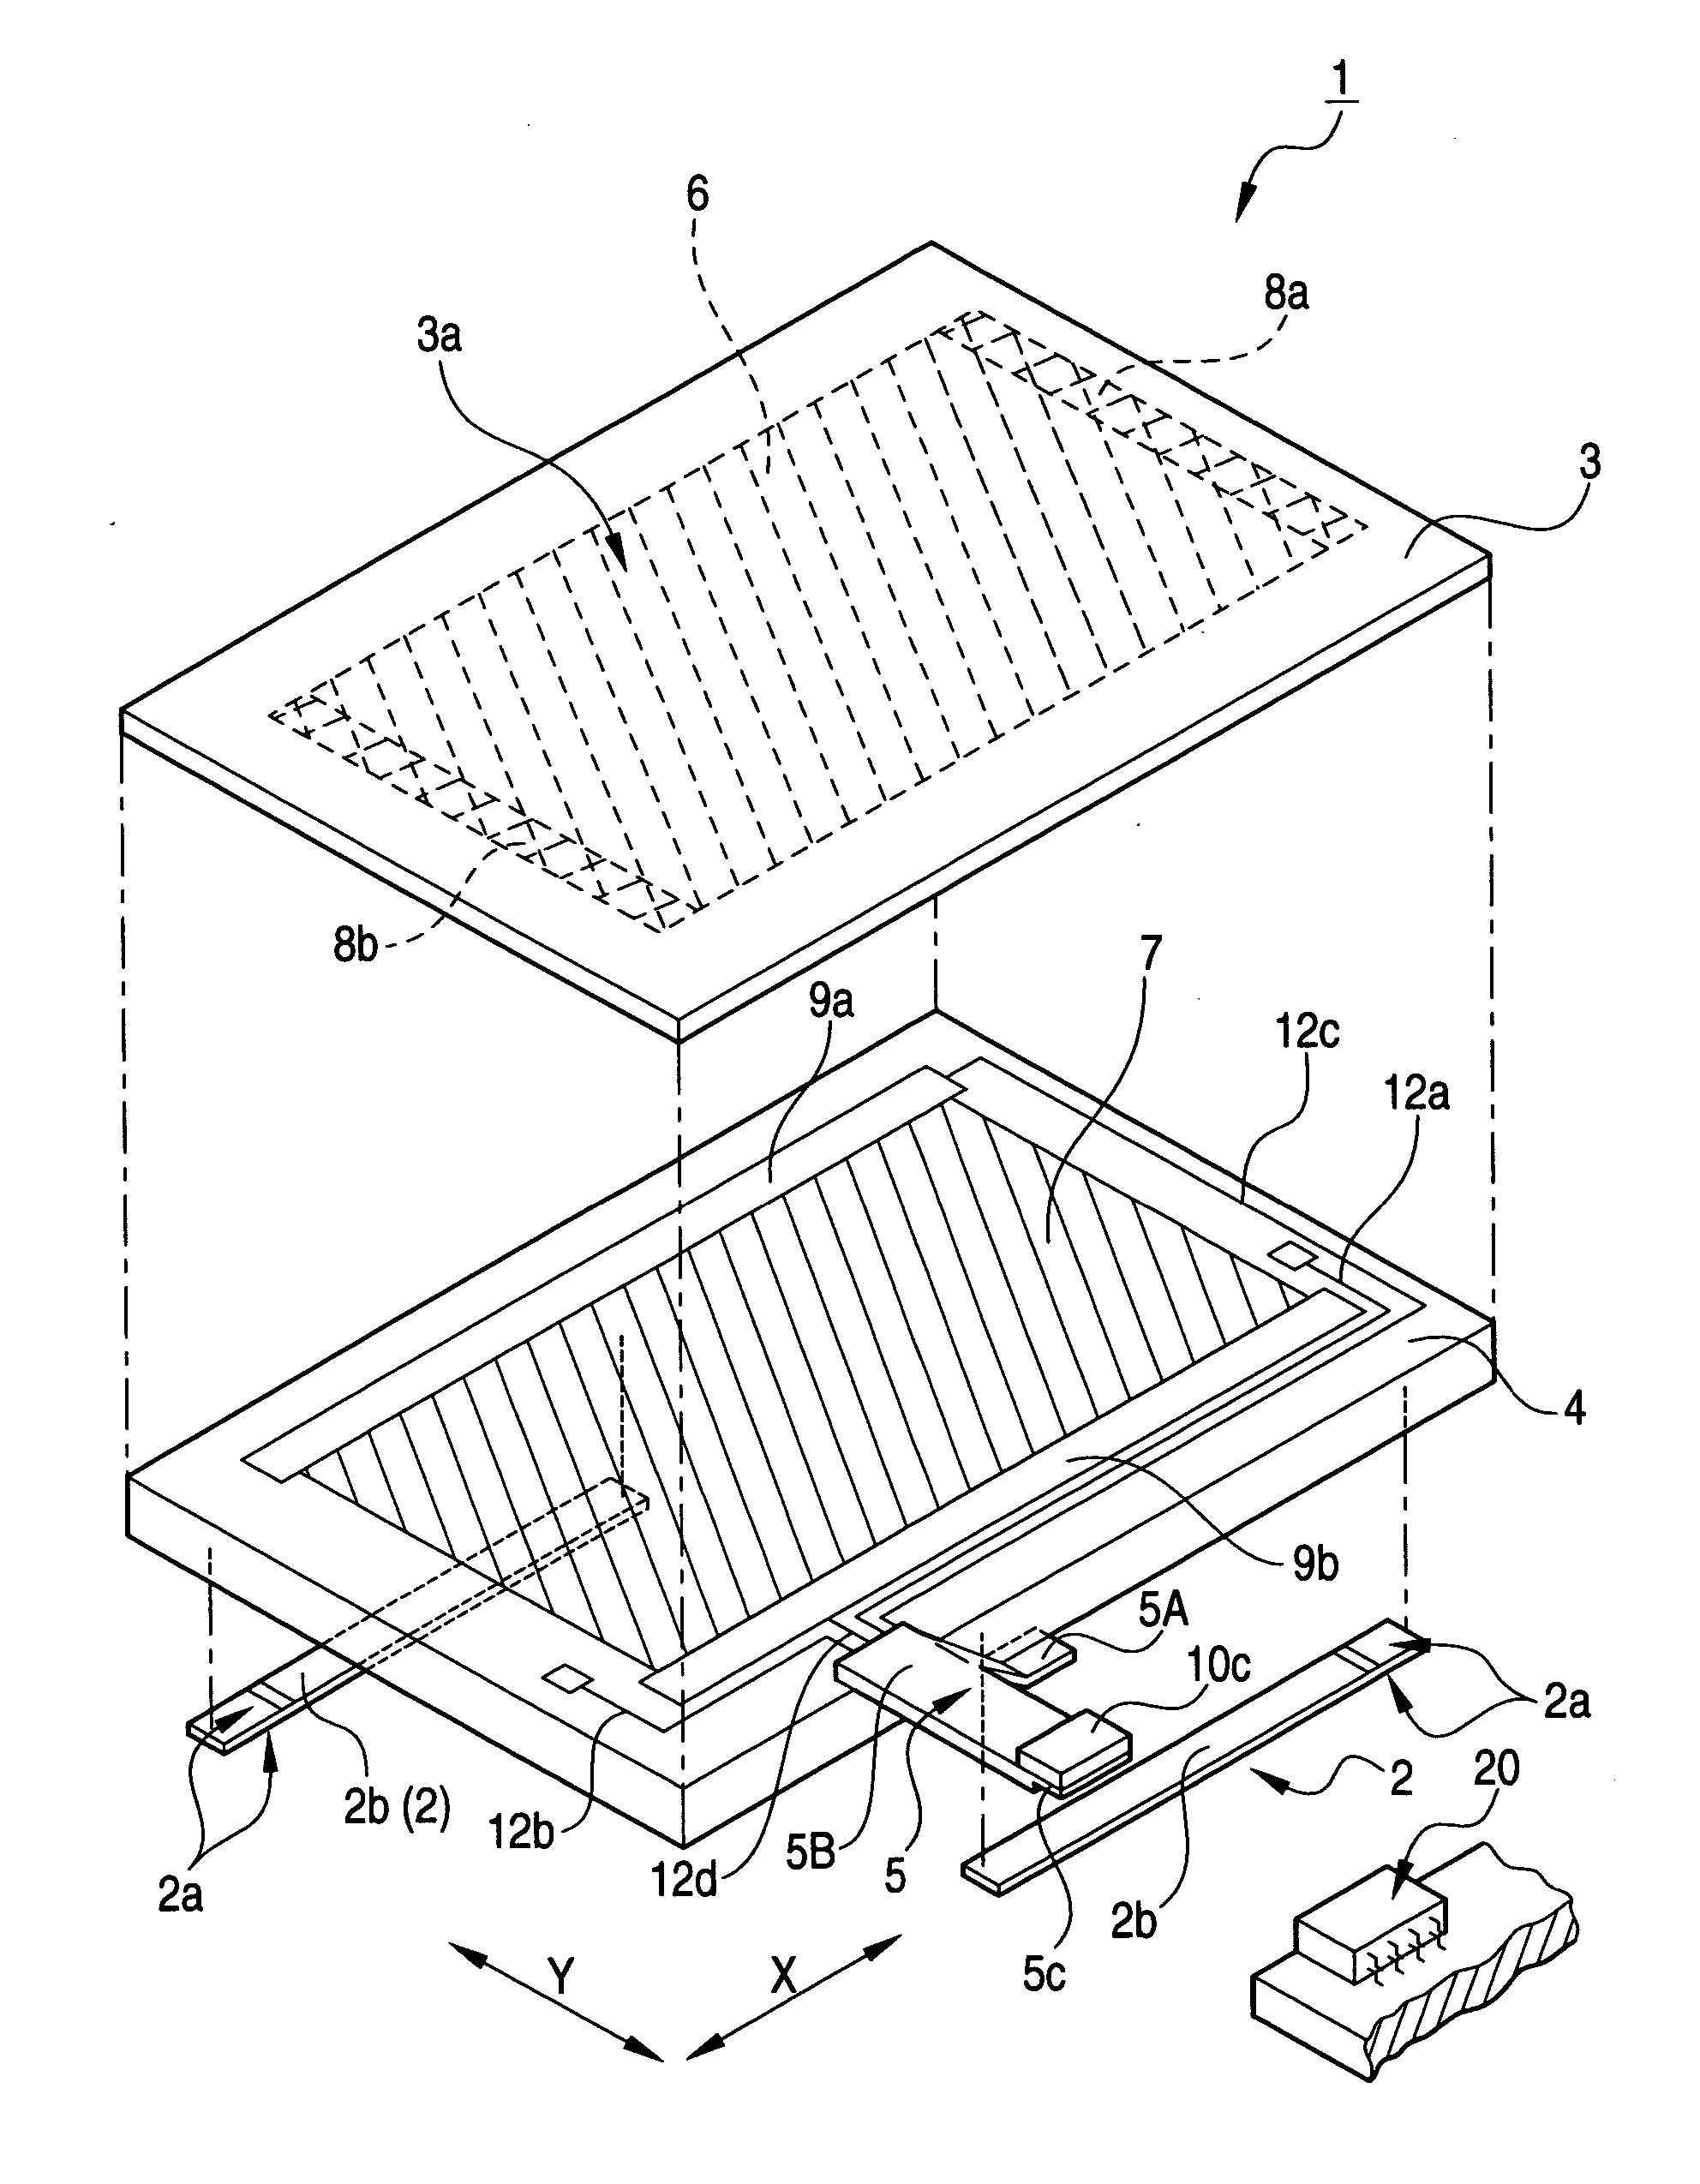 Touch panel input device